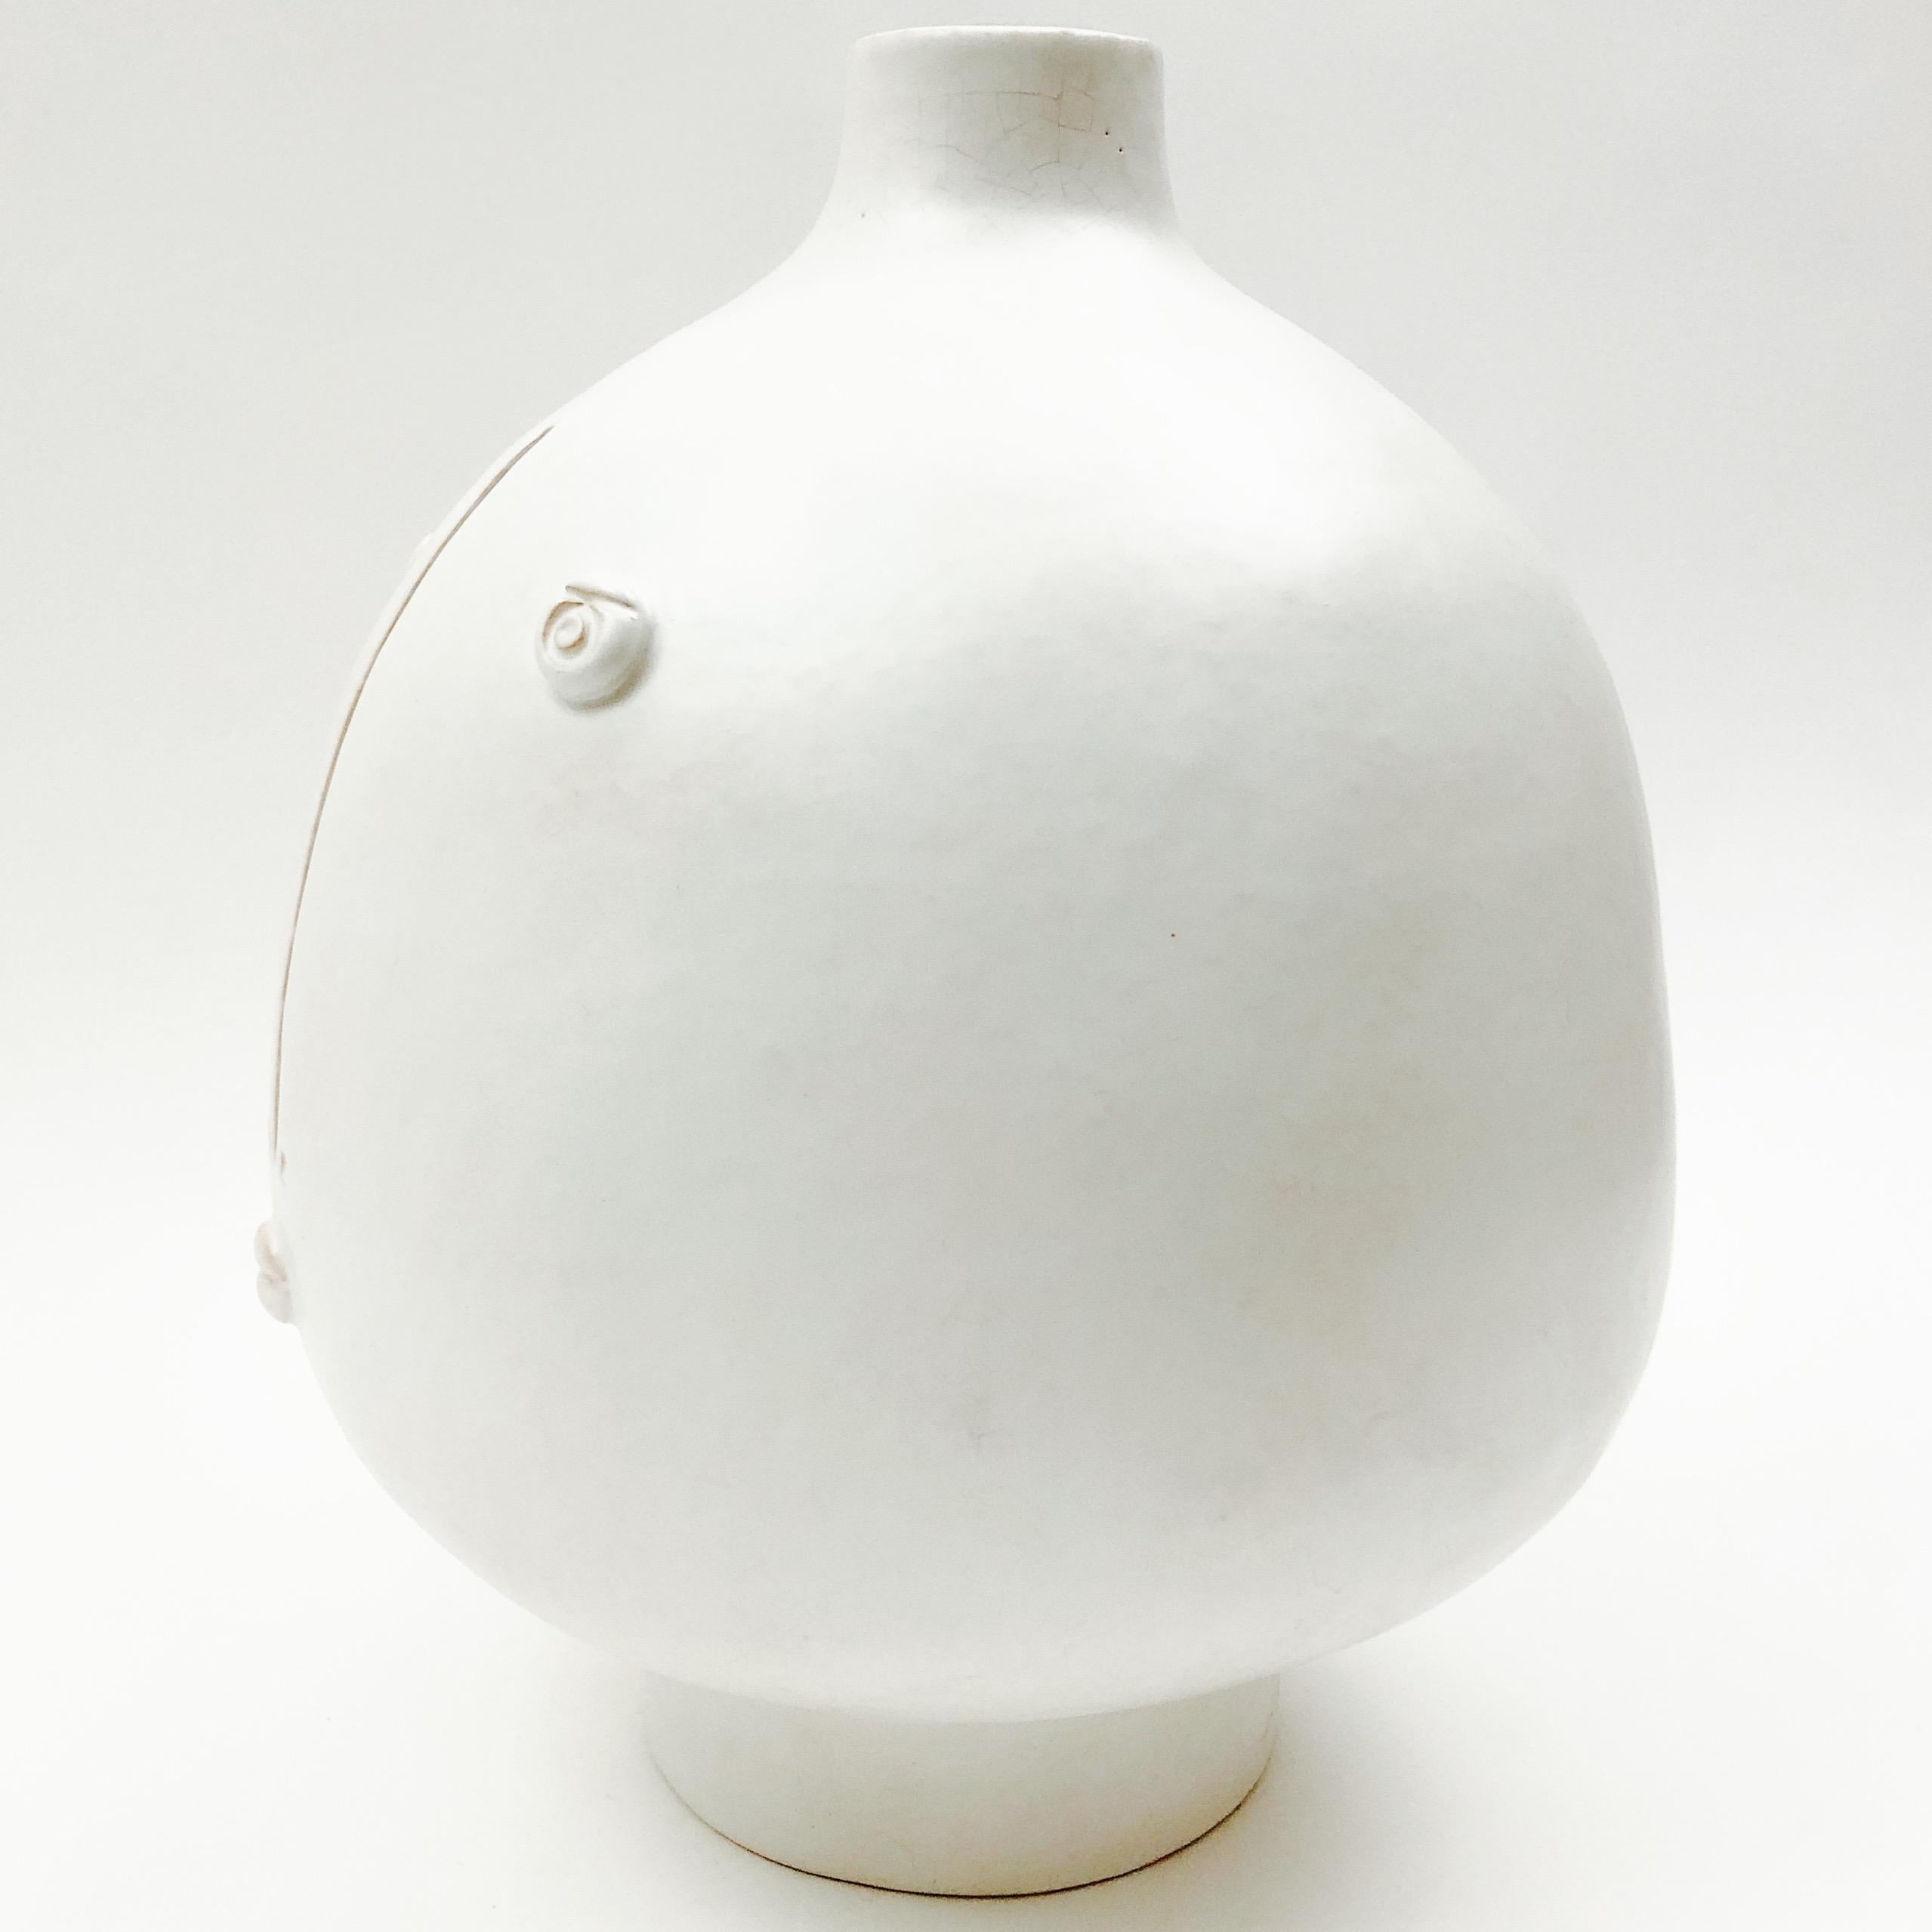 Sculptural pottery piece forming table lamp-base.
Ceramic glazed in matt white, decorated with a stylized visage sculpted and engraved front.
One of a kind handmade piece signed by the French artists ceramicists: Dalo.

Dimensions:
The height